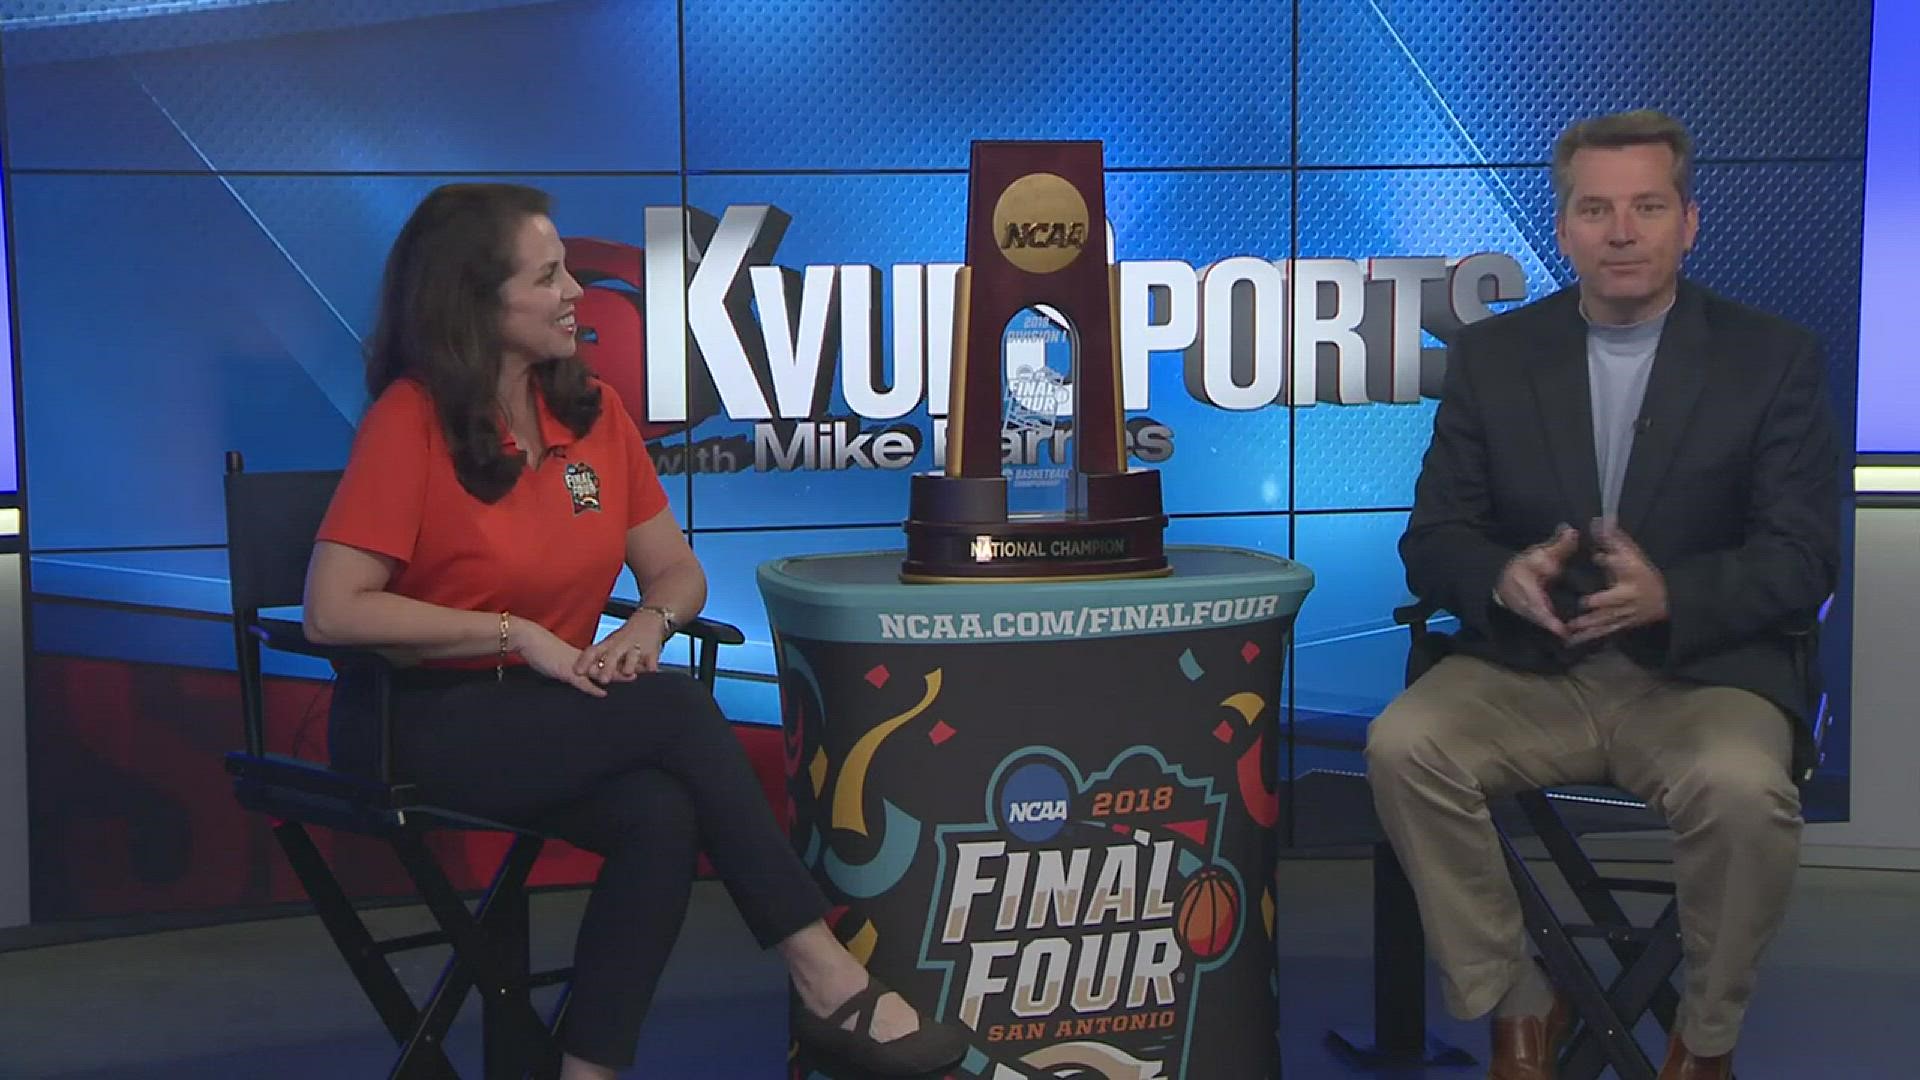 The Final Four is coming to San Antonio. Mary Ullman Japhet of the San Antonio Organizing Committee talks with KVUE's Mike Barnes